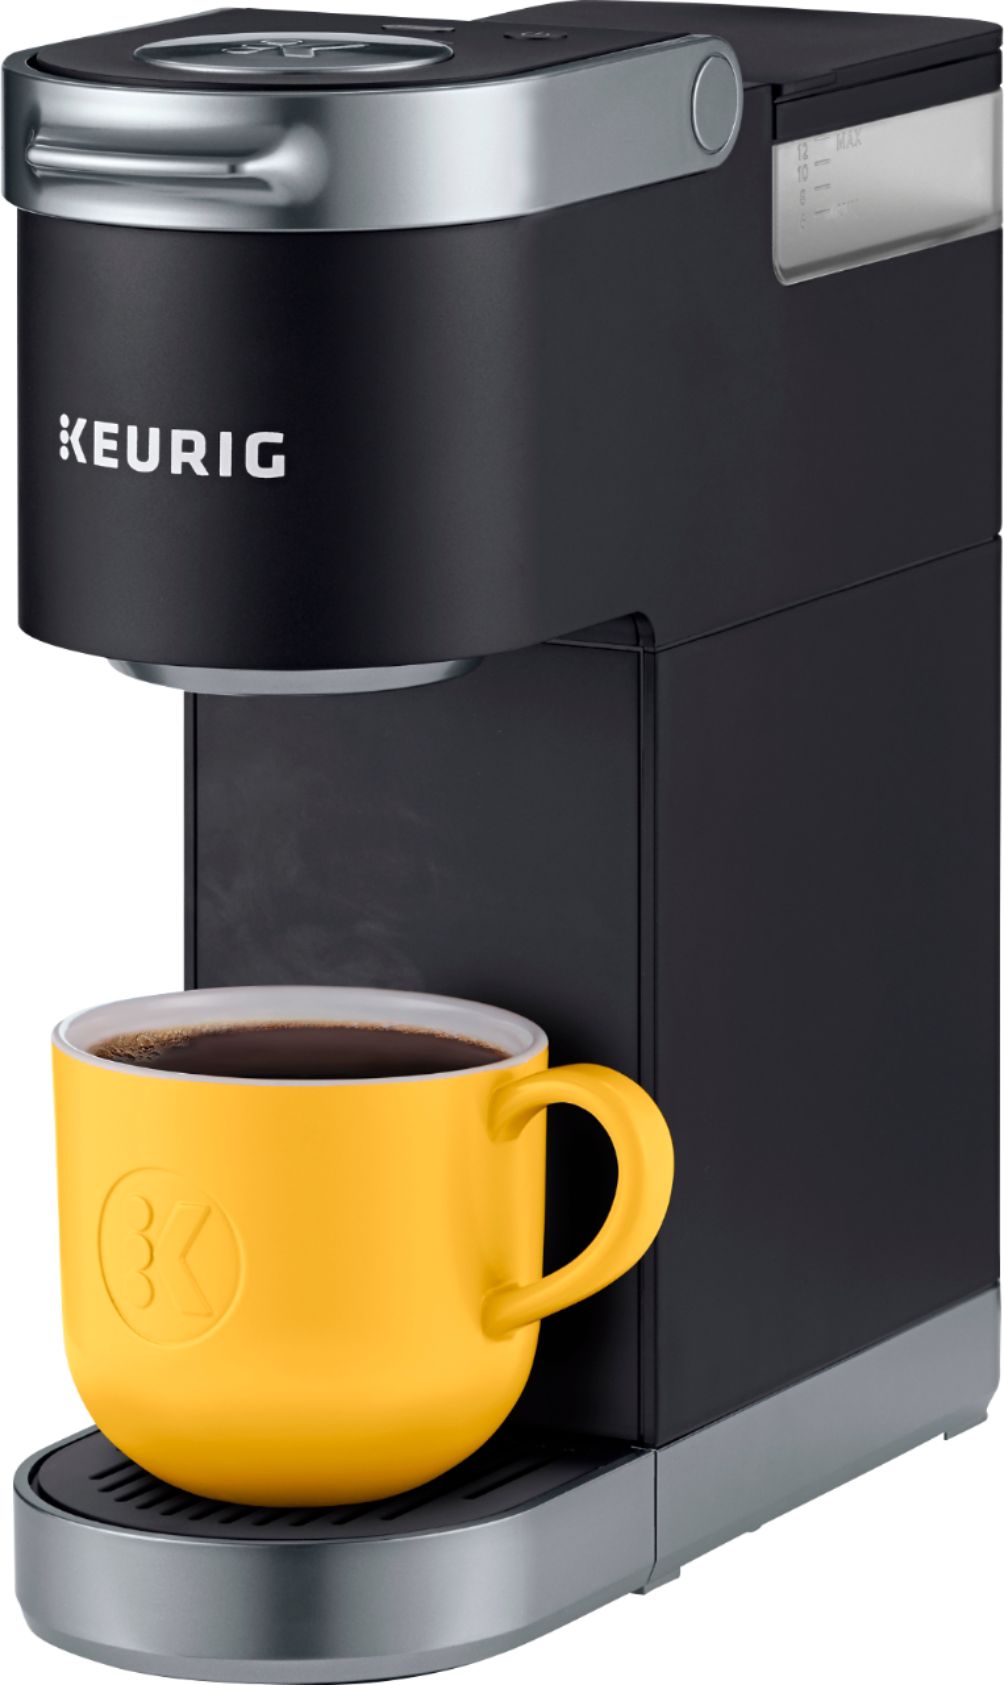 Keurig K-Mini Plus Coffee Maker with My K-Cup and 24 K-cups 